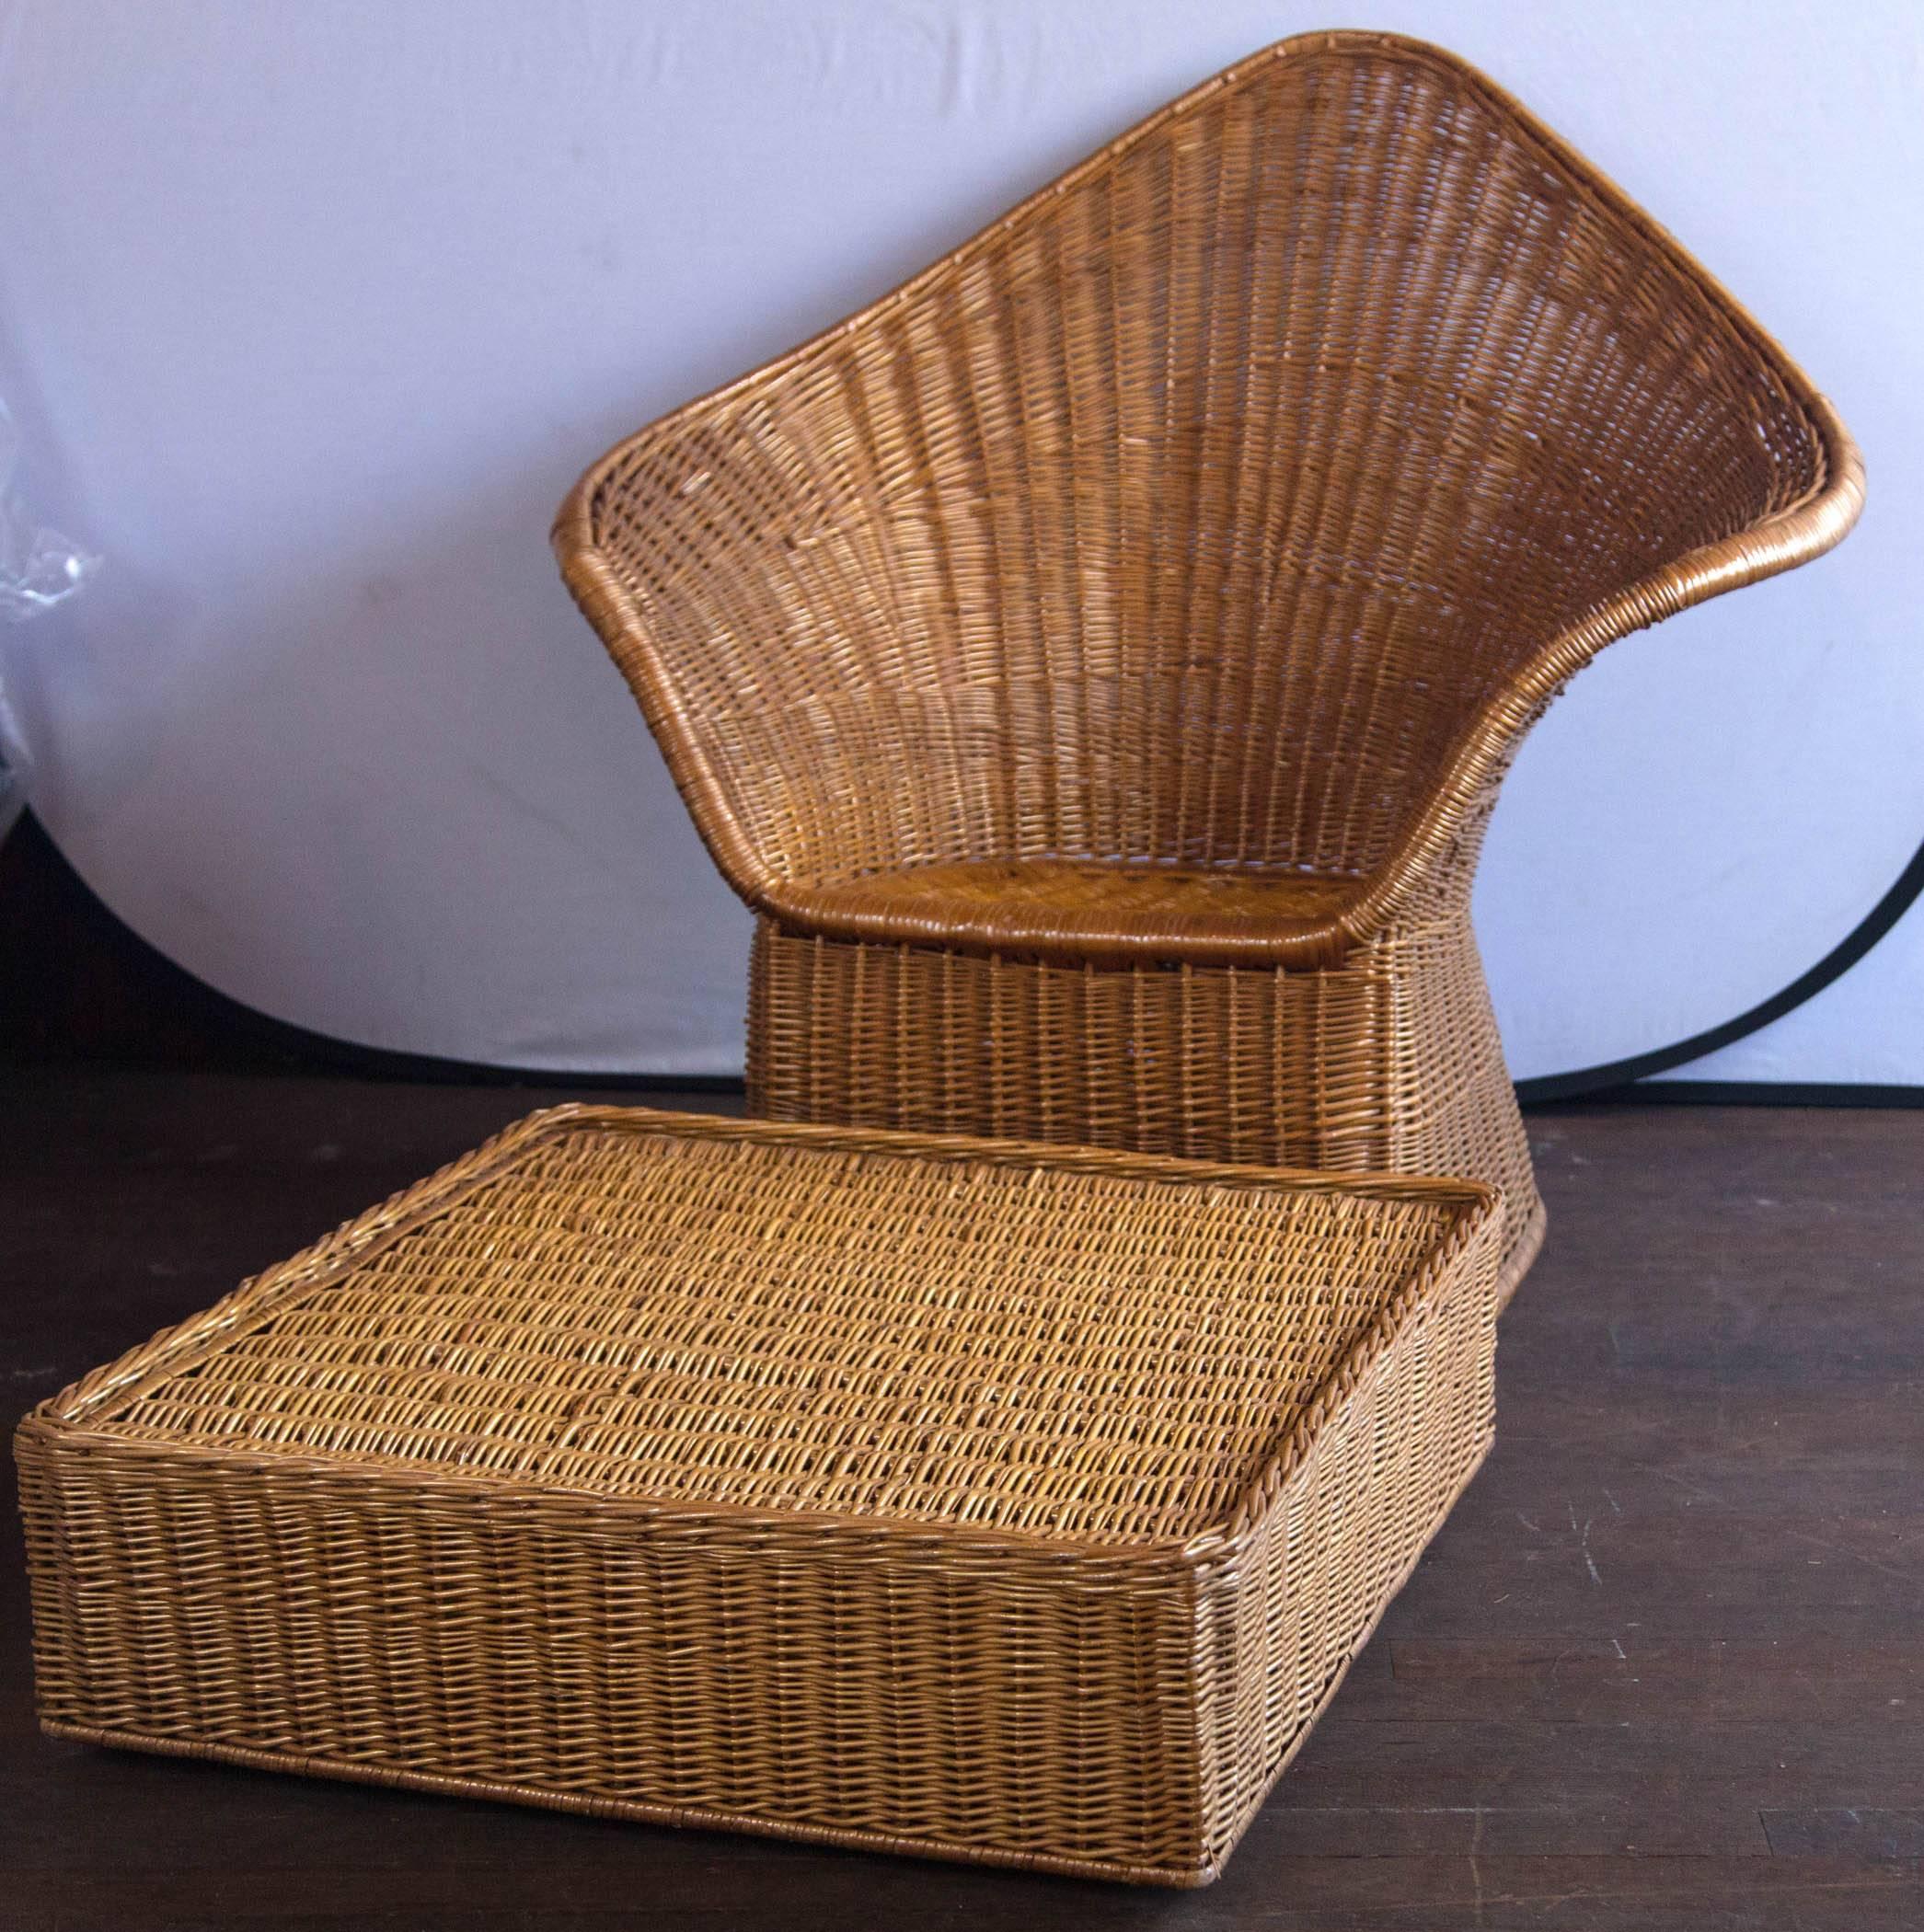 High drama! Unusual modern wicker armchair with large ottoman. Comfortable!
Ottoman is 31 inches square, 9 inches high.